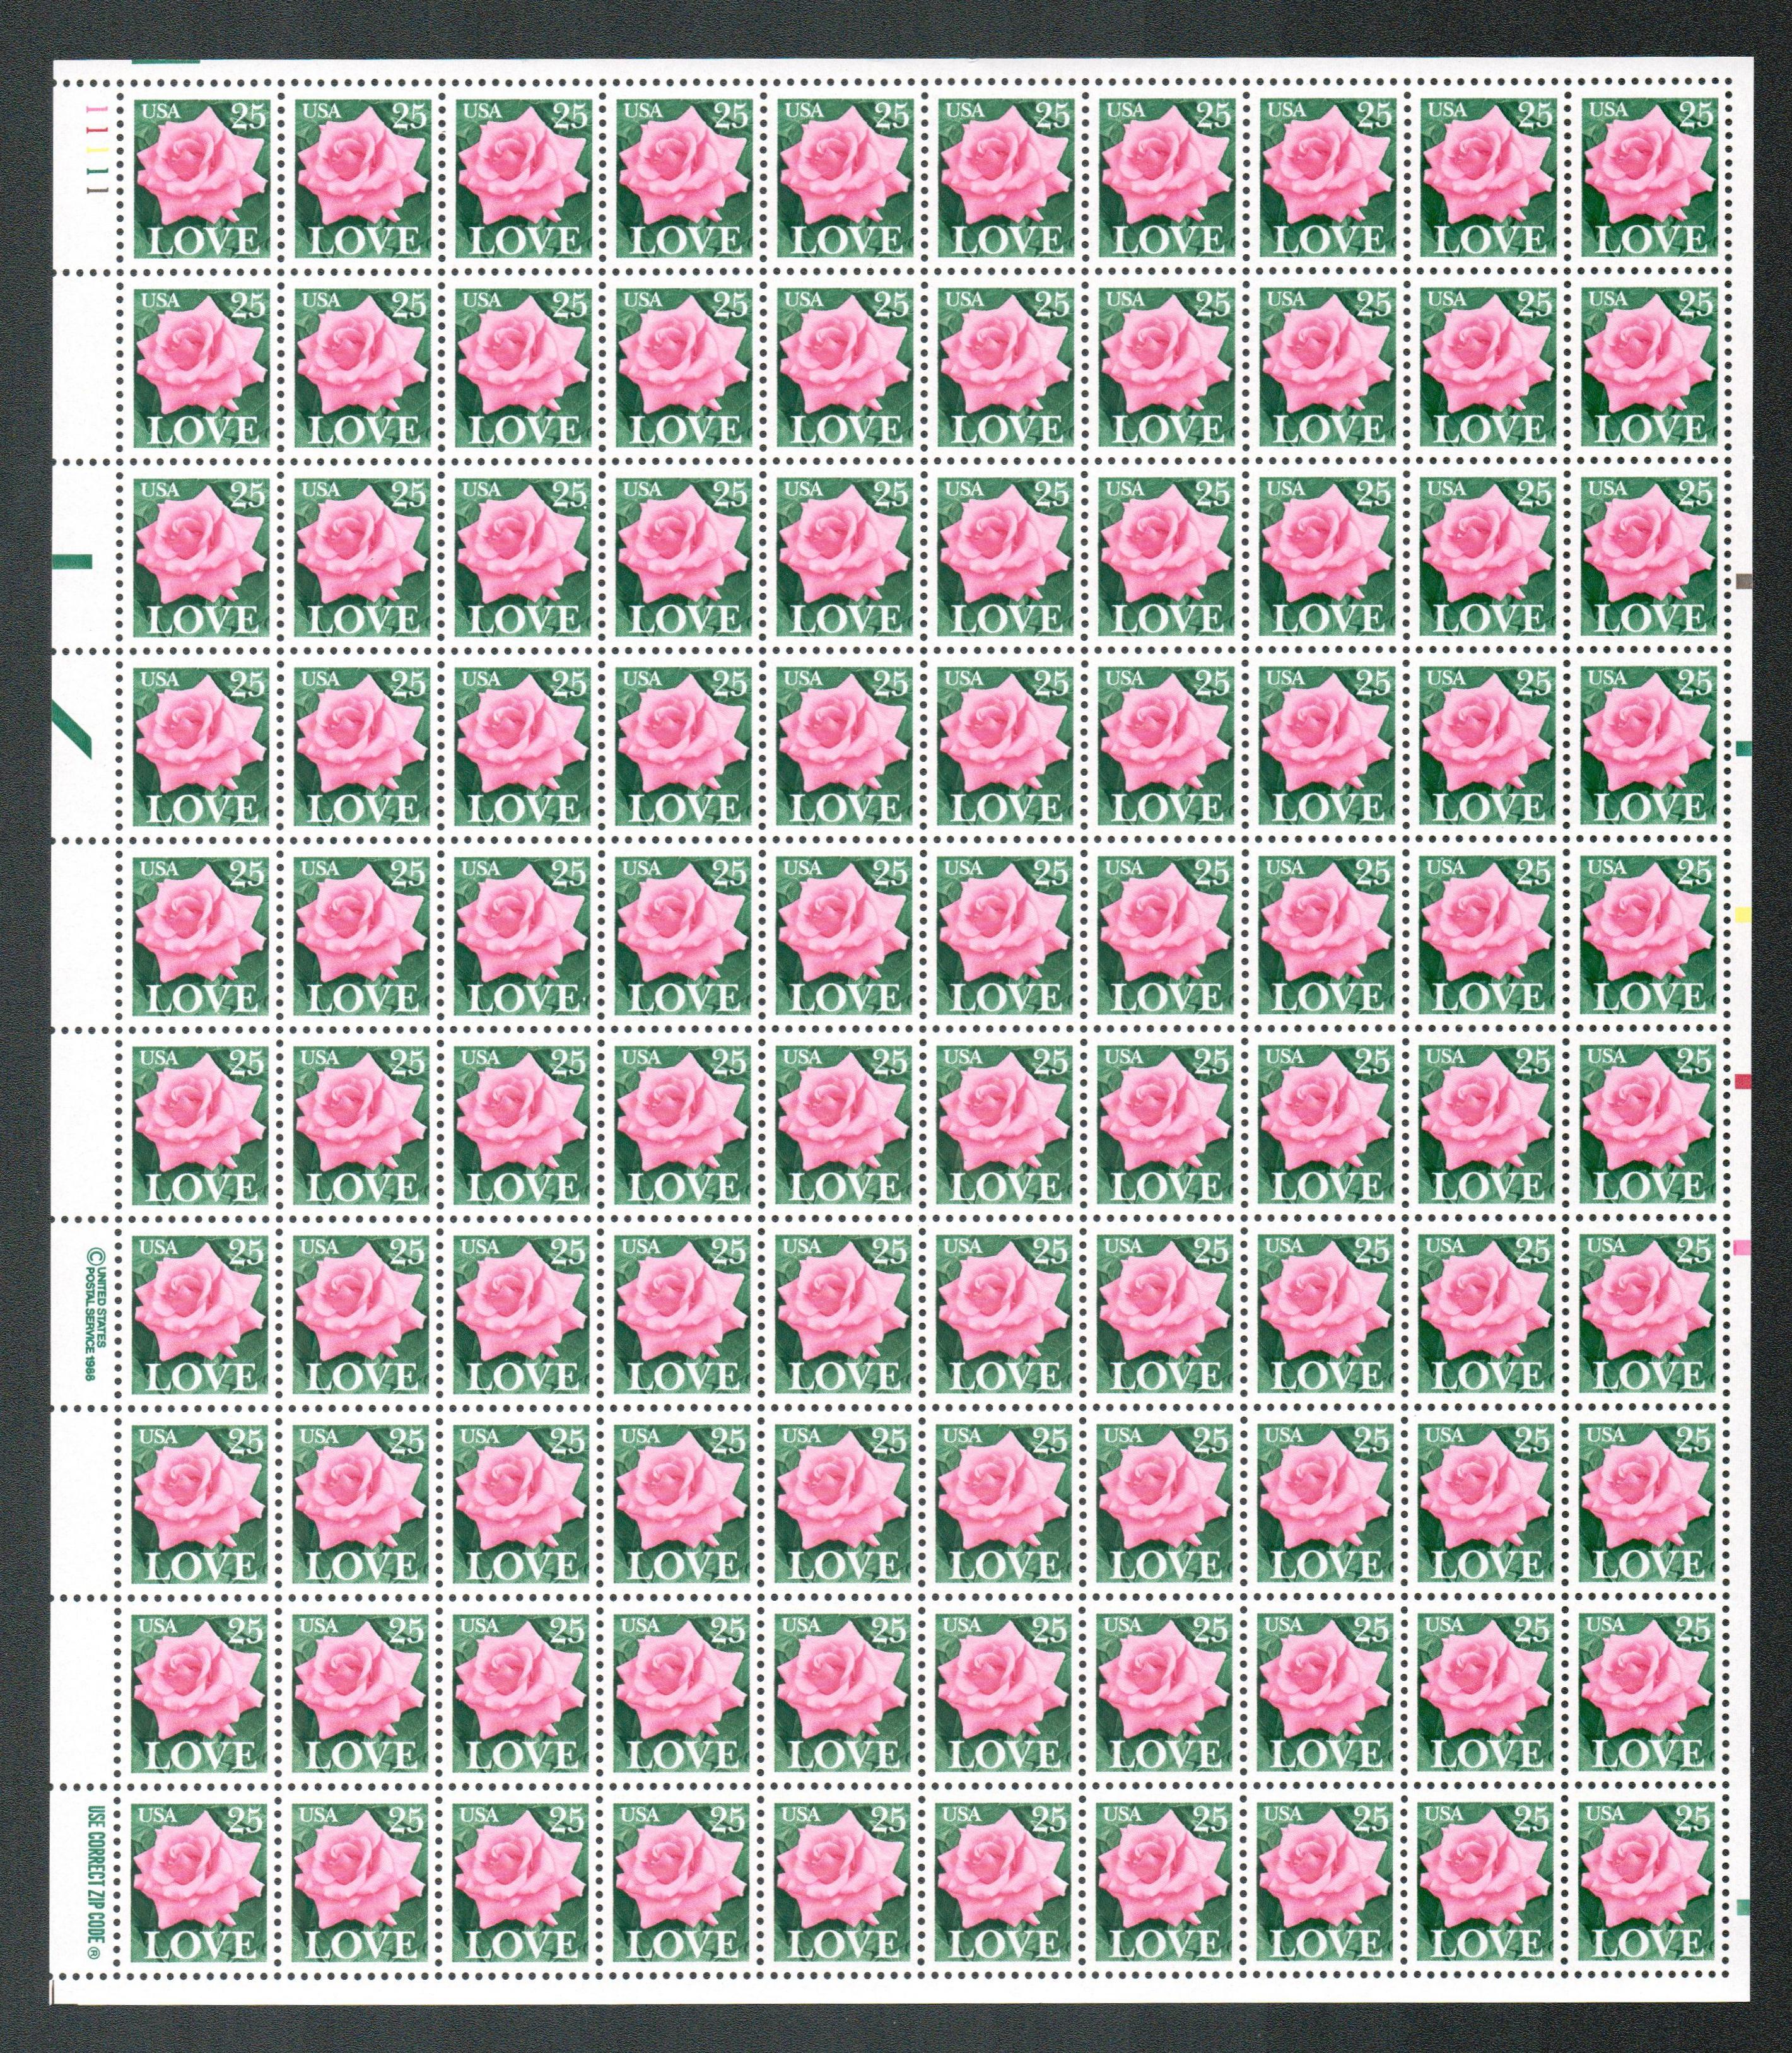 10 Vintage Rose Postage Stamps // 45¢ Pink and Yellow Roses // Garden  Flowers LOVE Stamps For Mailing Wedding Invitations and Valentines